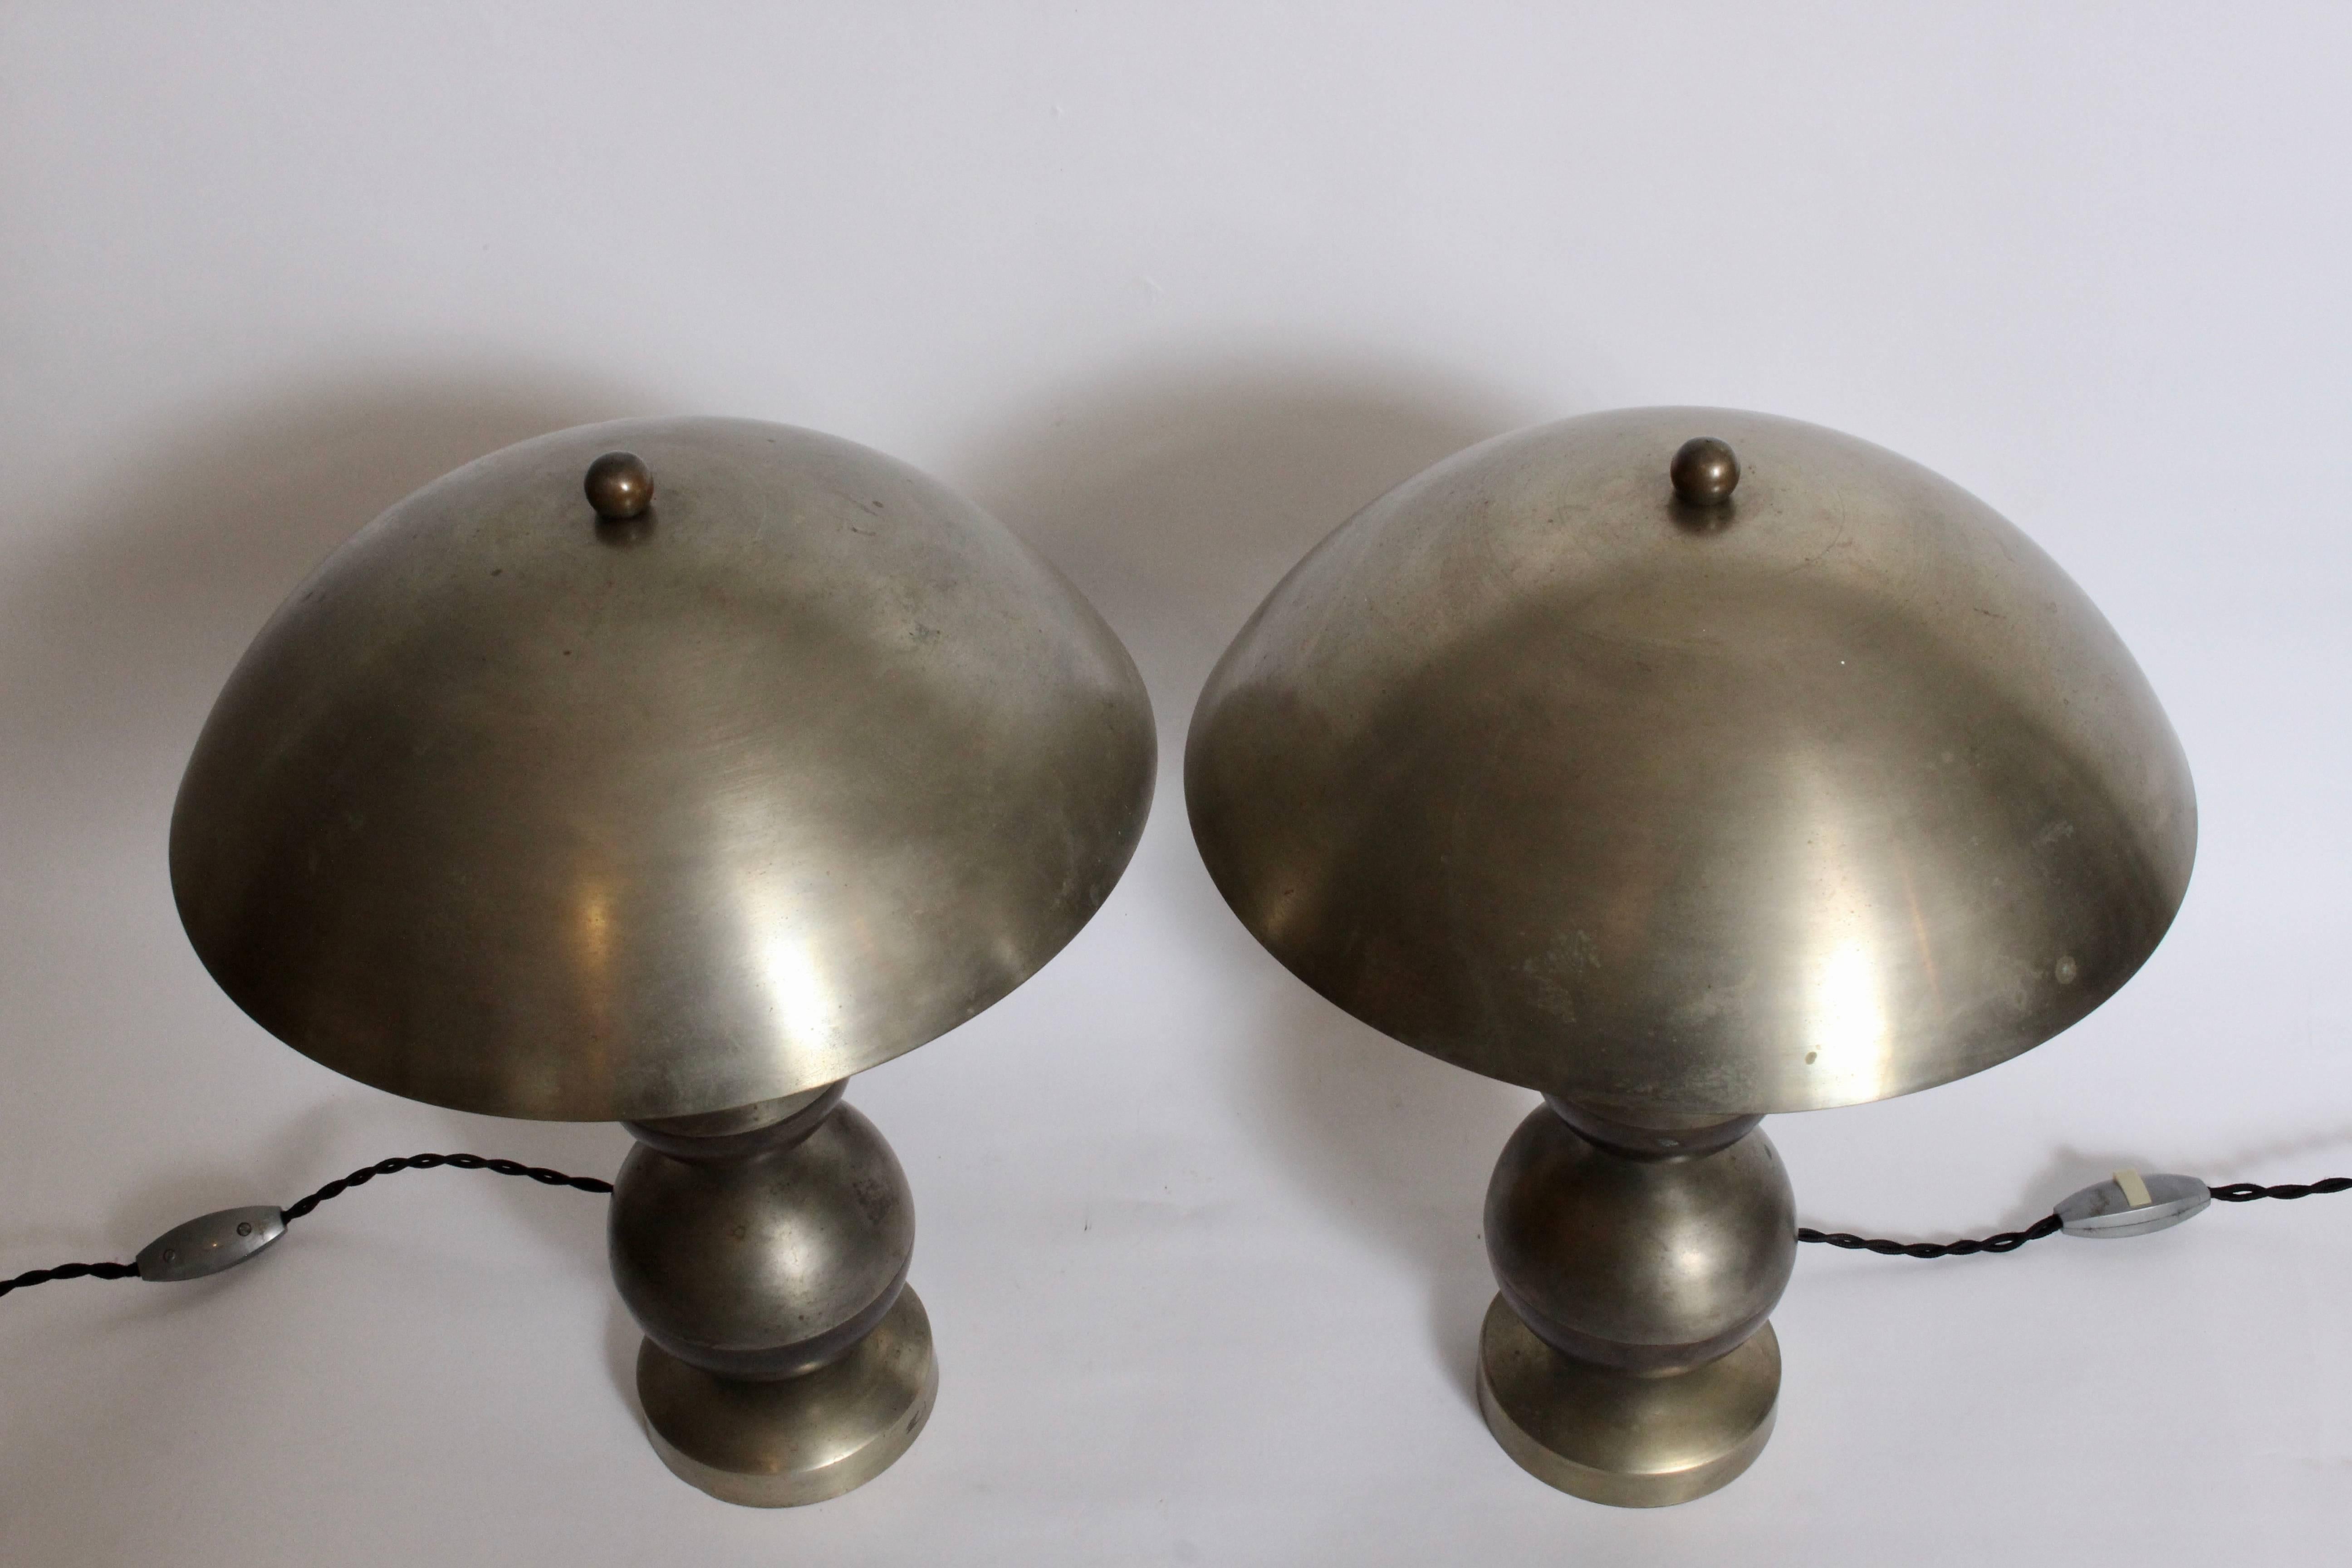 Bauhaus Pair of Boris Lacroix Stacked Nickel Plate & Brass Table Lamps with Dome Shades